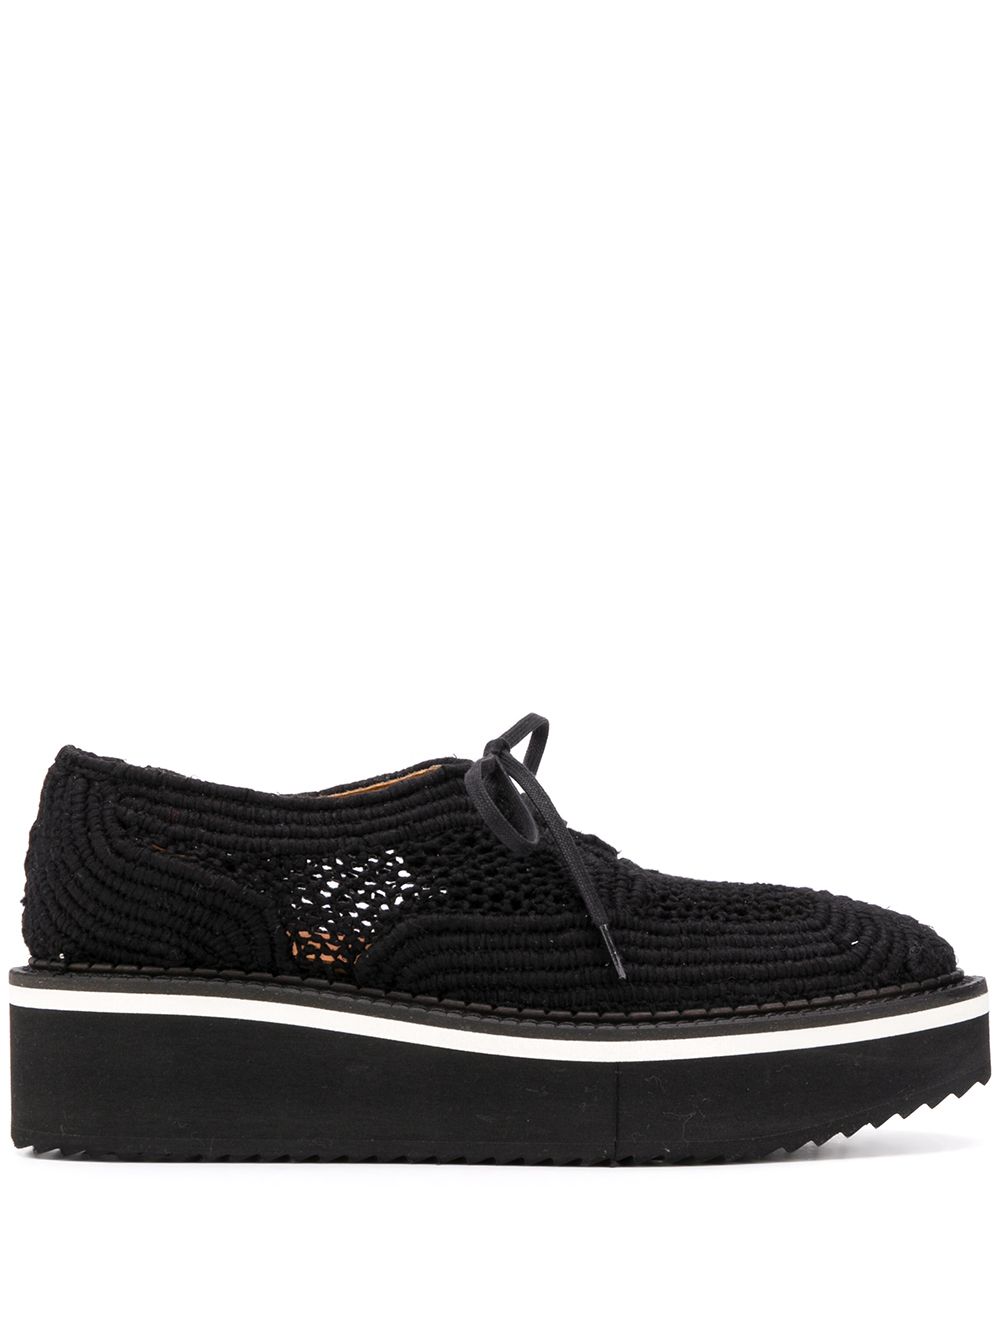 Clergerie Brandy Shoes In Black